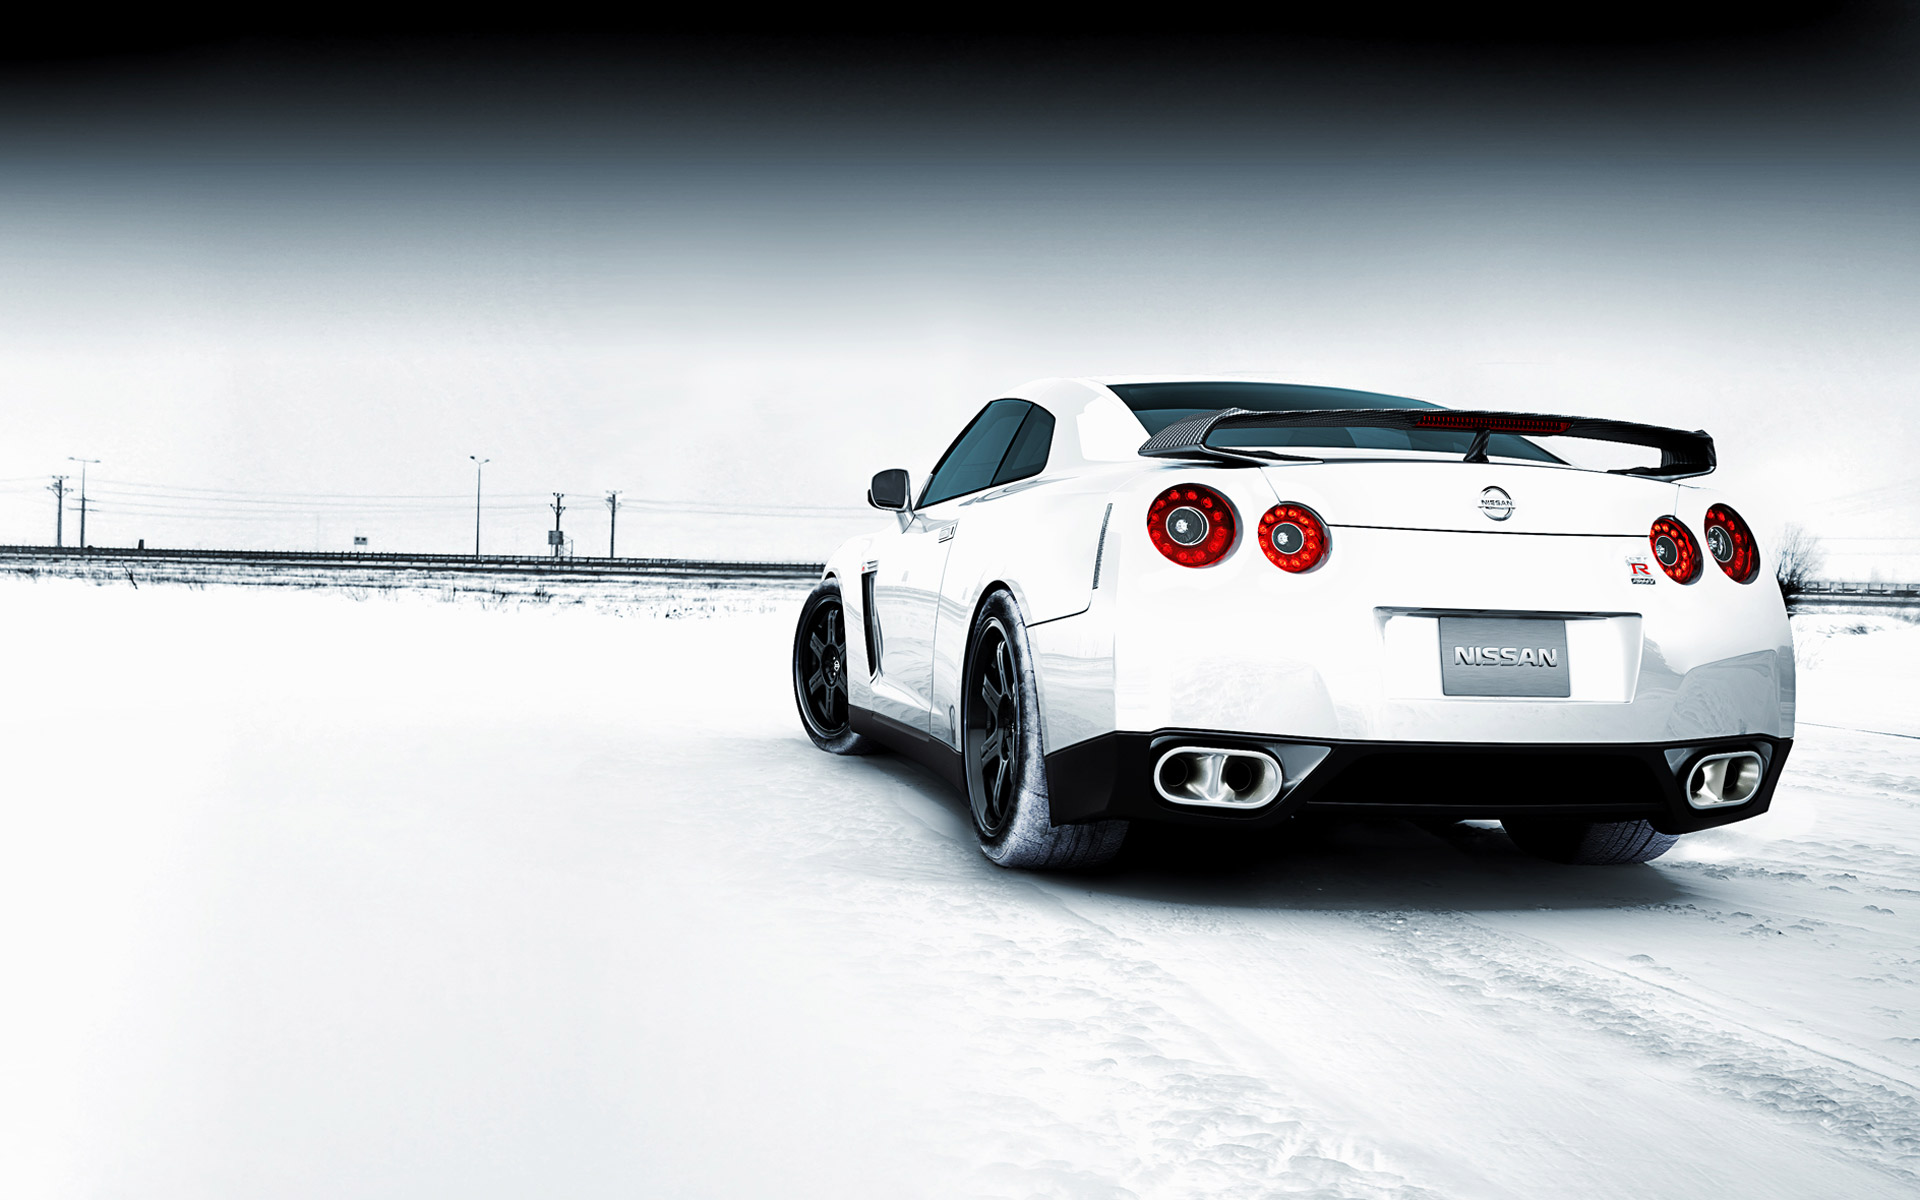 Download High quality Nissan wallpaper / Cars / 1920x1200